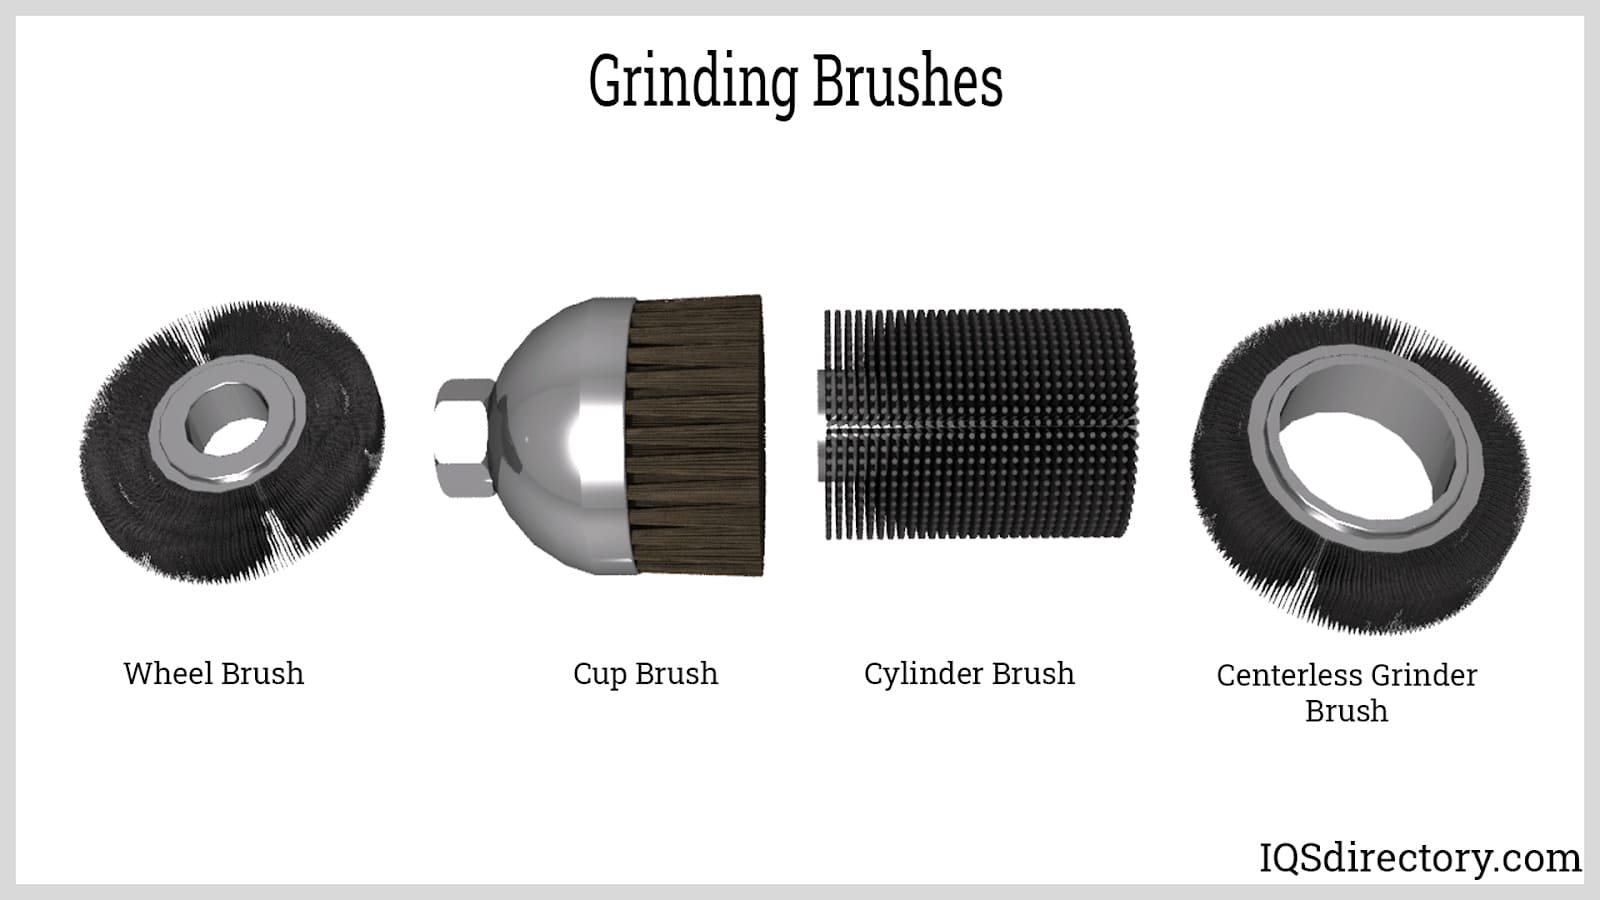 Cylinder Cup Wheel and Centerless Grinder Brushes